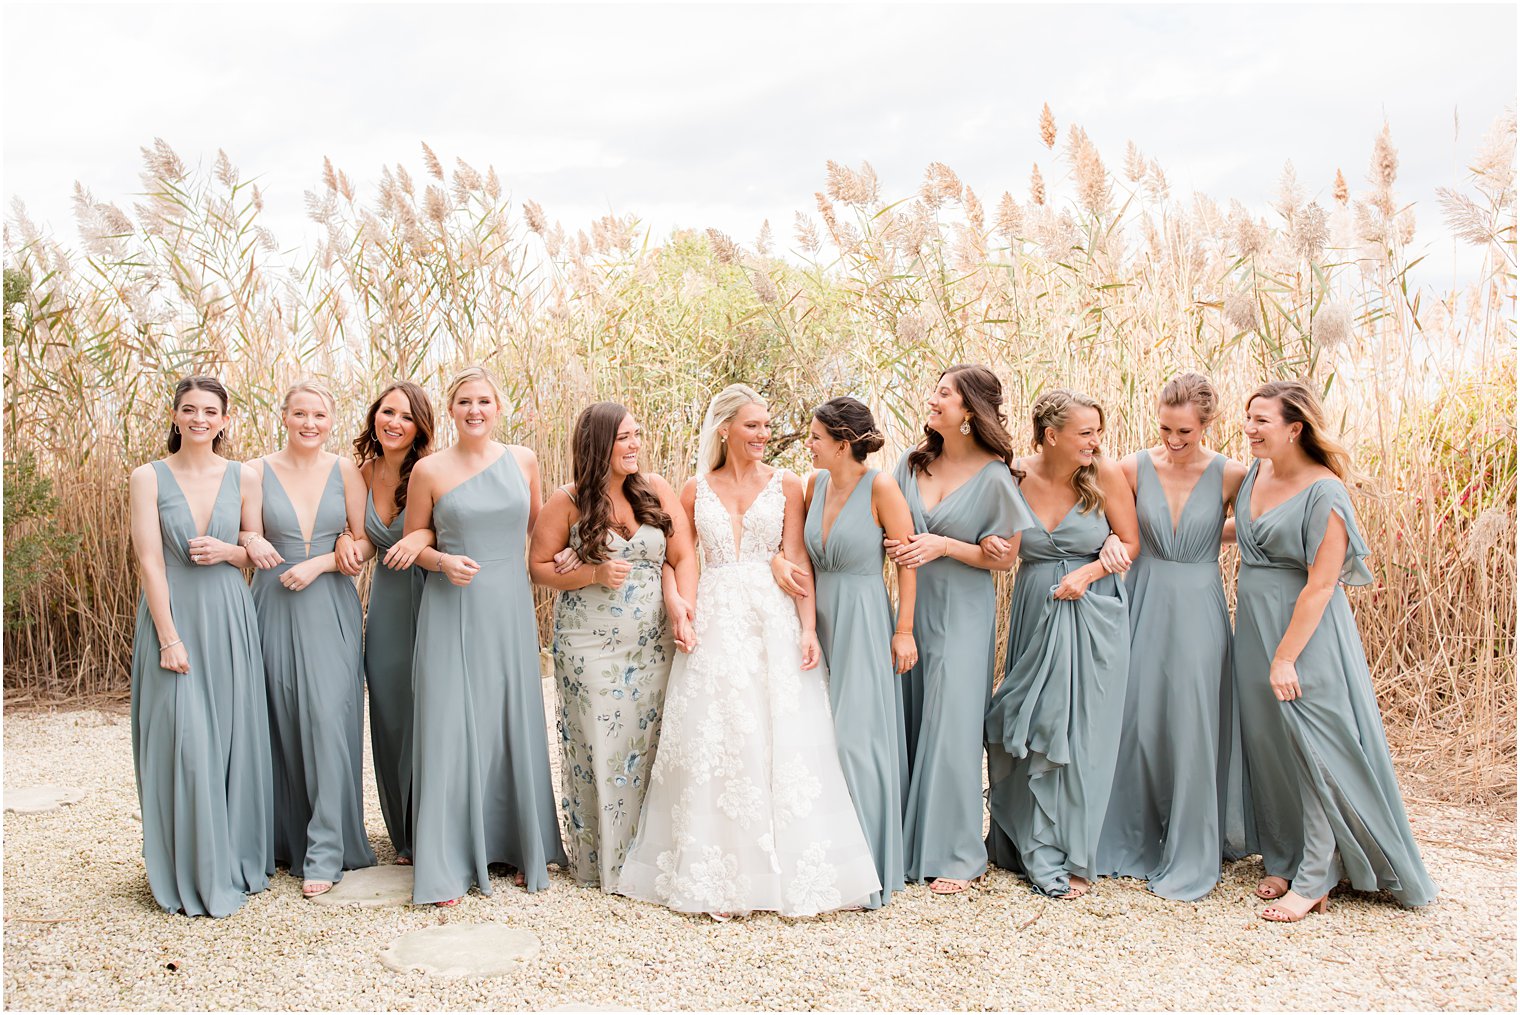 bride and bridesmaids walk on beach together before fall wedding day